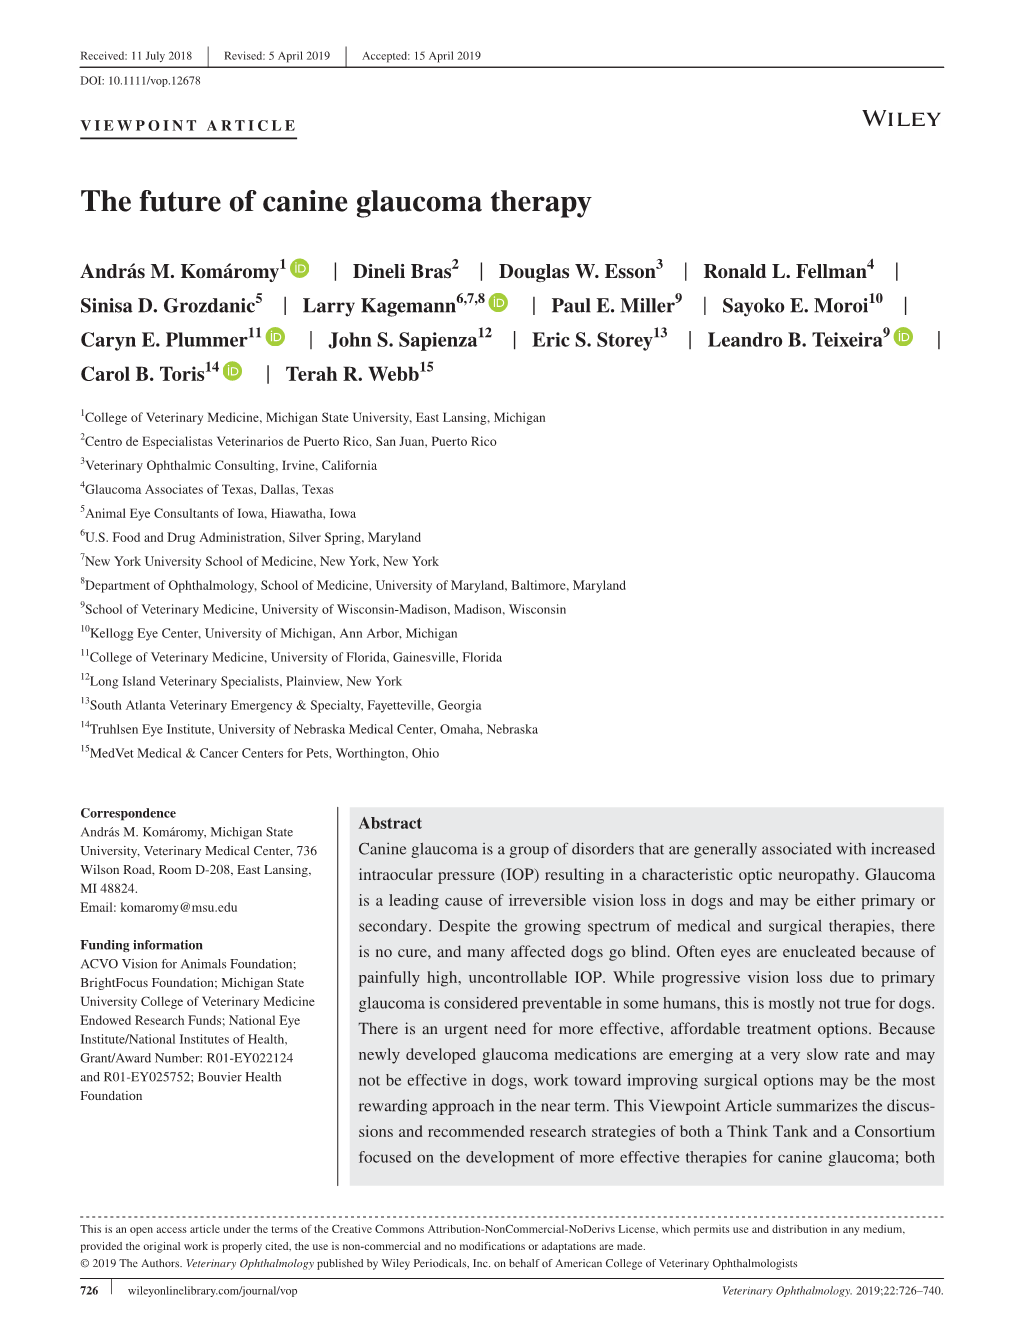 The Future of Canine Glaucoma Therapy